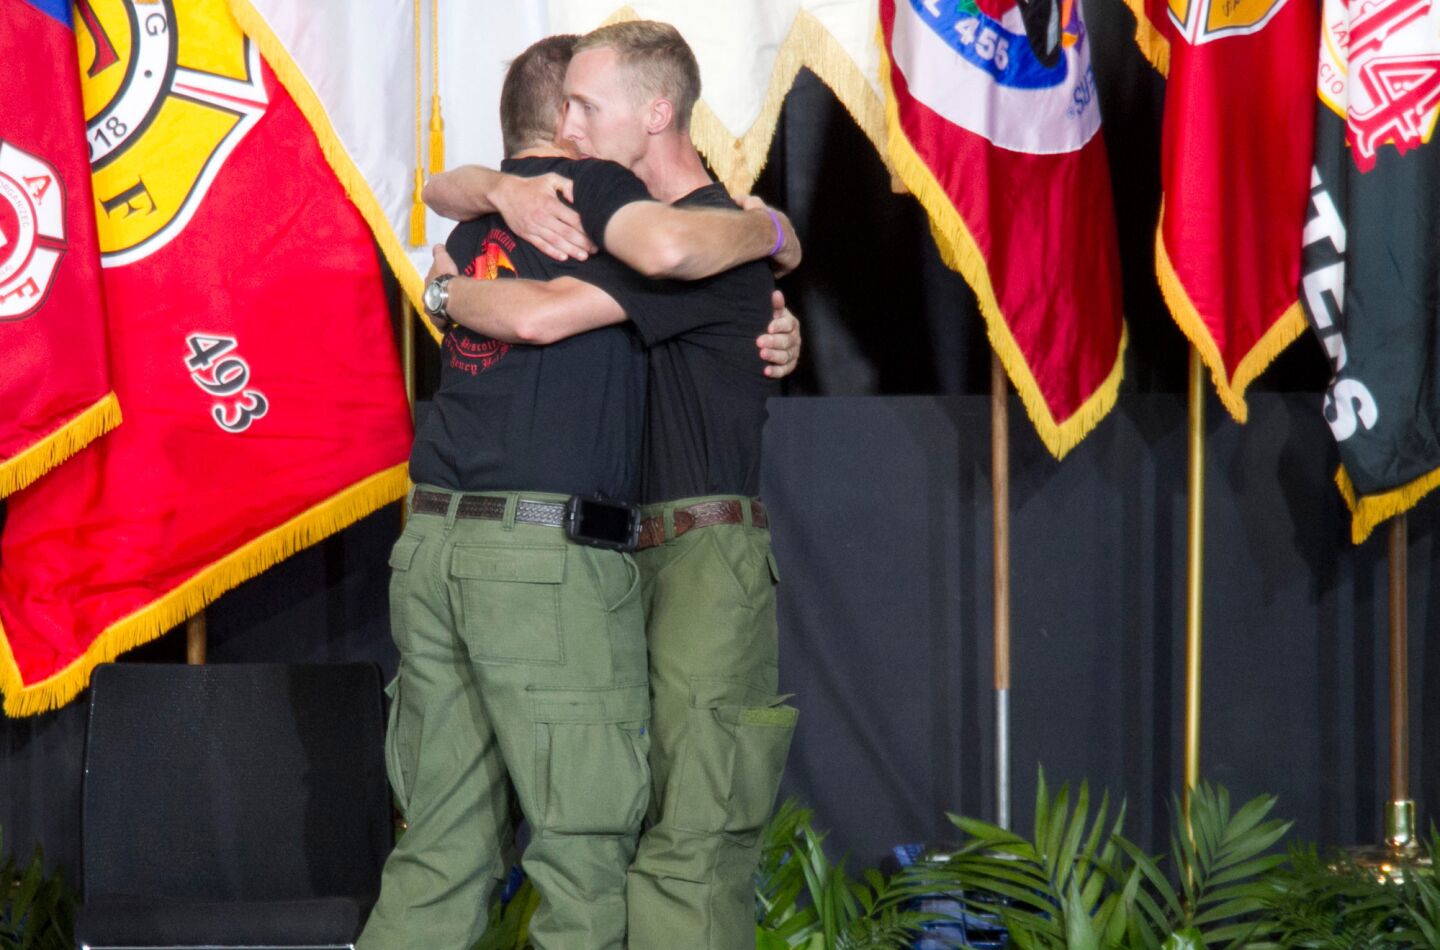 Brendan McDonough, right, the sole surviving member of the Granite Mountain Hotshots crew, hugs Darrell Willis, division chief of the Prescott Fire Department, during the memorial service.